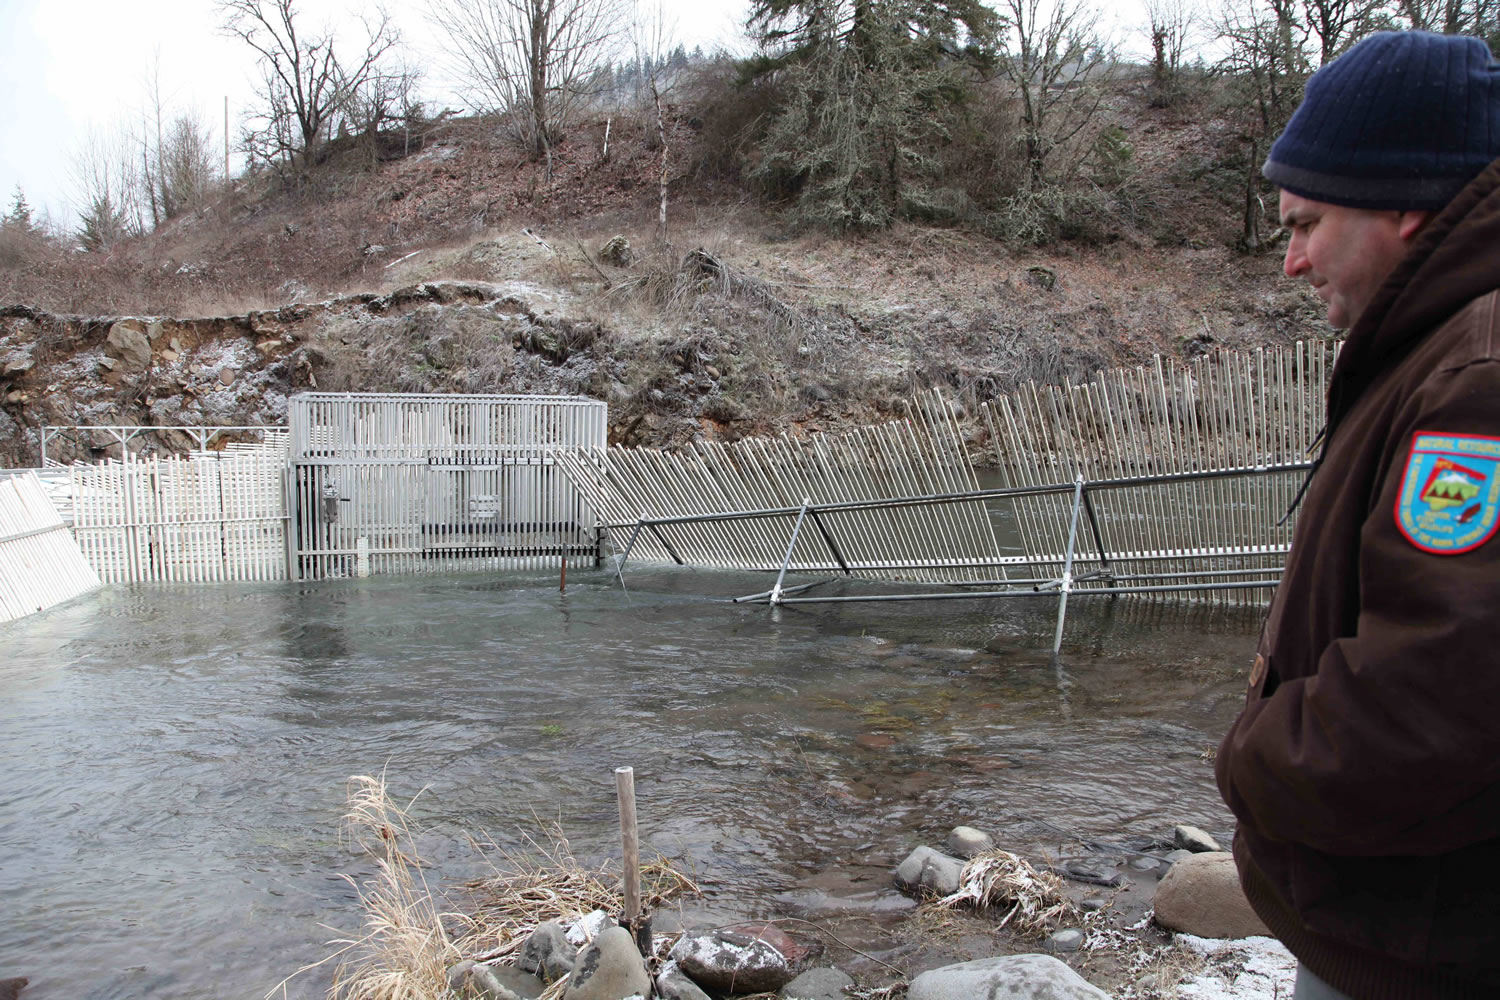 Hood River hatchery coordinator Chris Brun looks Feb. 4 at the weirs recently installed to catch salmon and steelhead returning to the hatchery in Parkdale, Ore., to spawn.